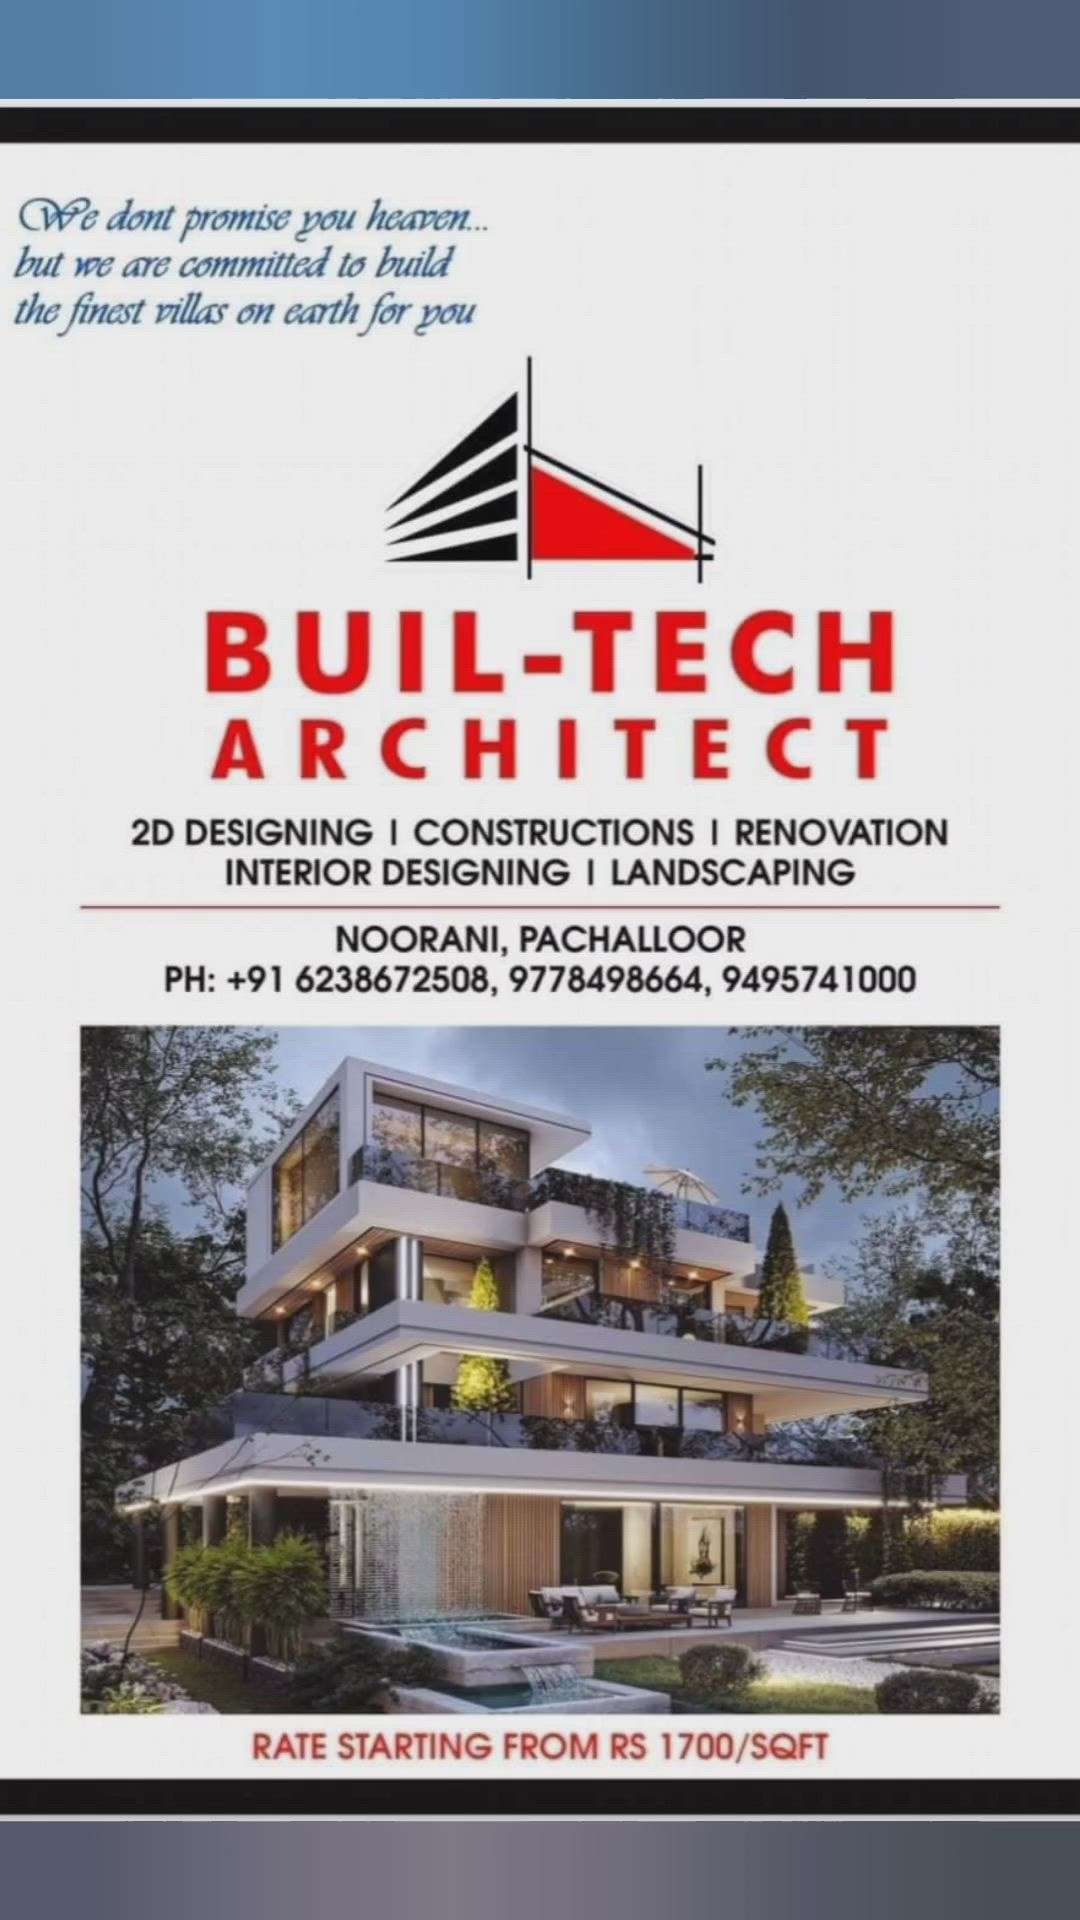 #HouseConstruction #CivilEngineer #coustomised #please_contact_for_any_enquiry #anystyle